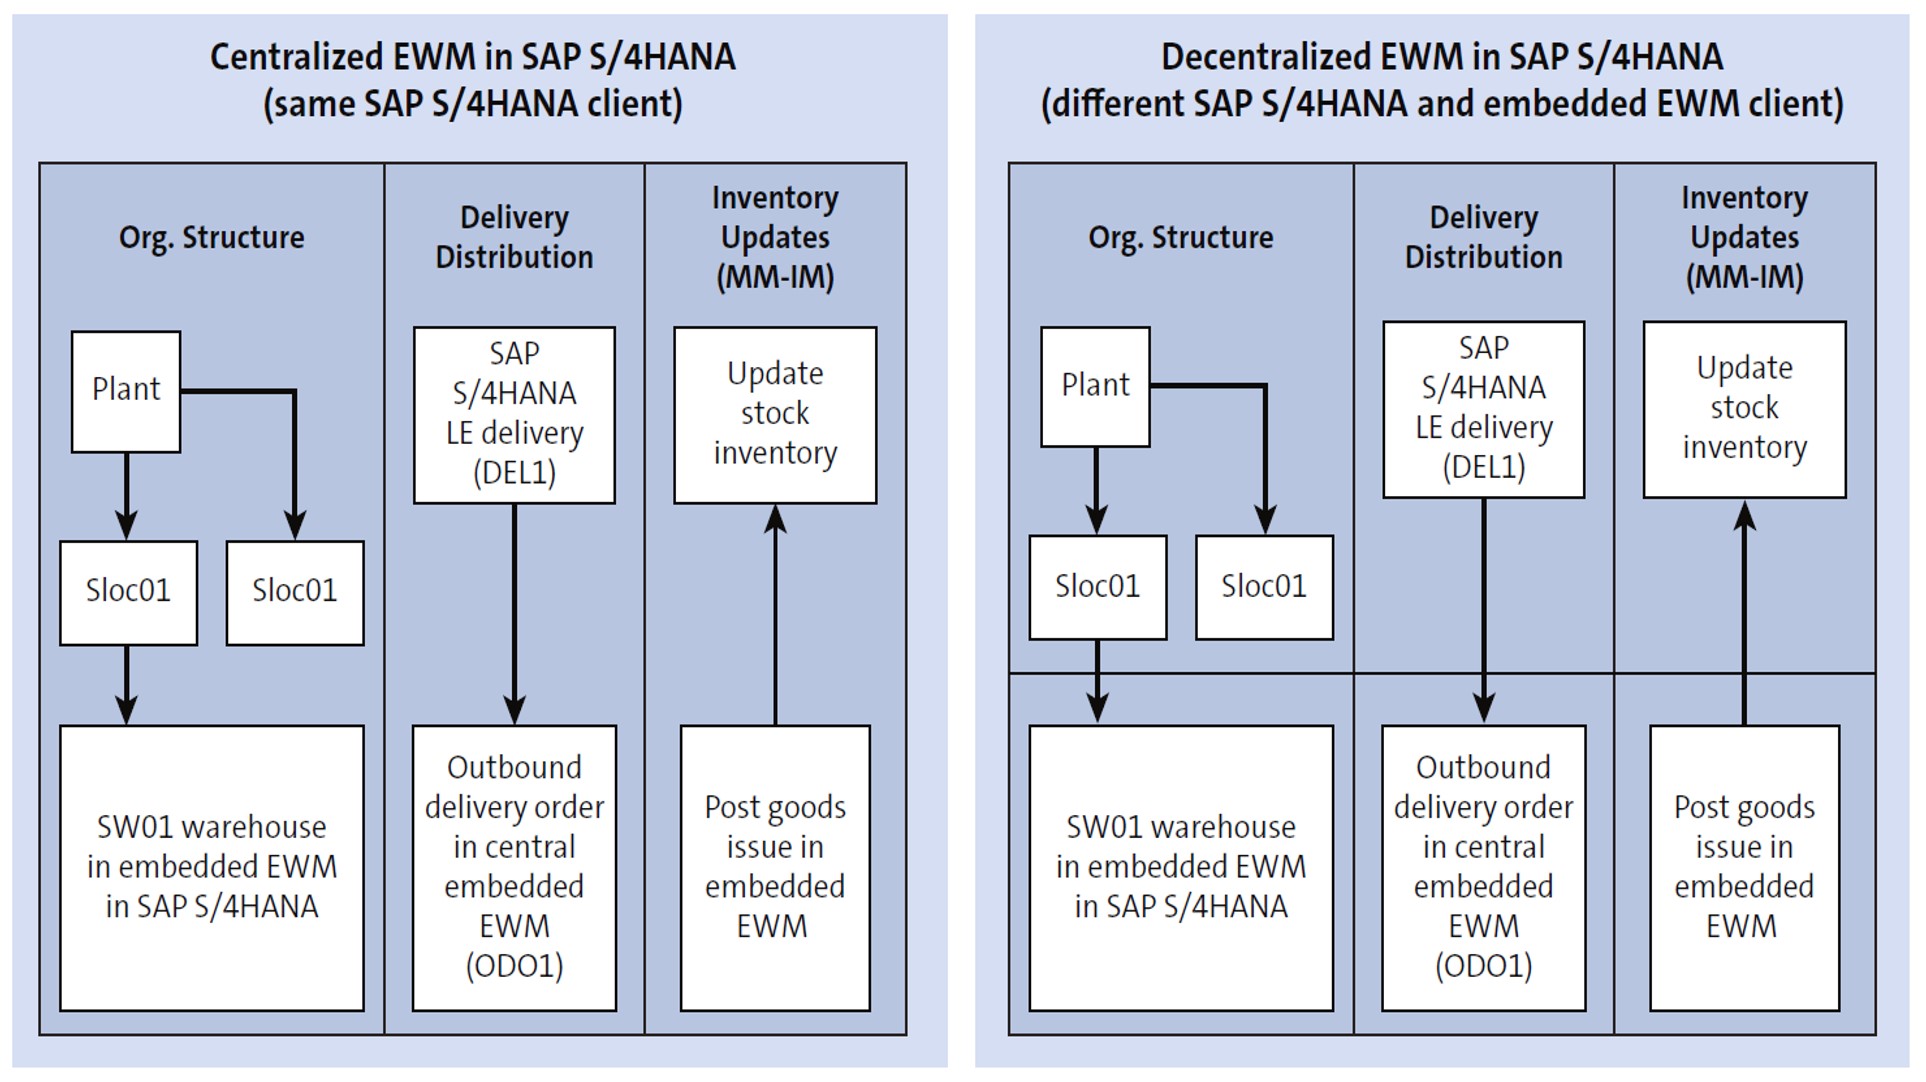 an-overview-of-ewm-with-sap-s-4hana-embedded-decentralized-and-stock